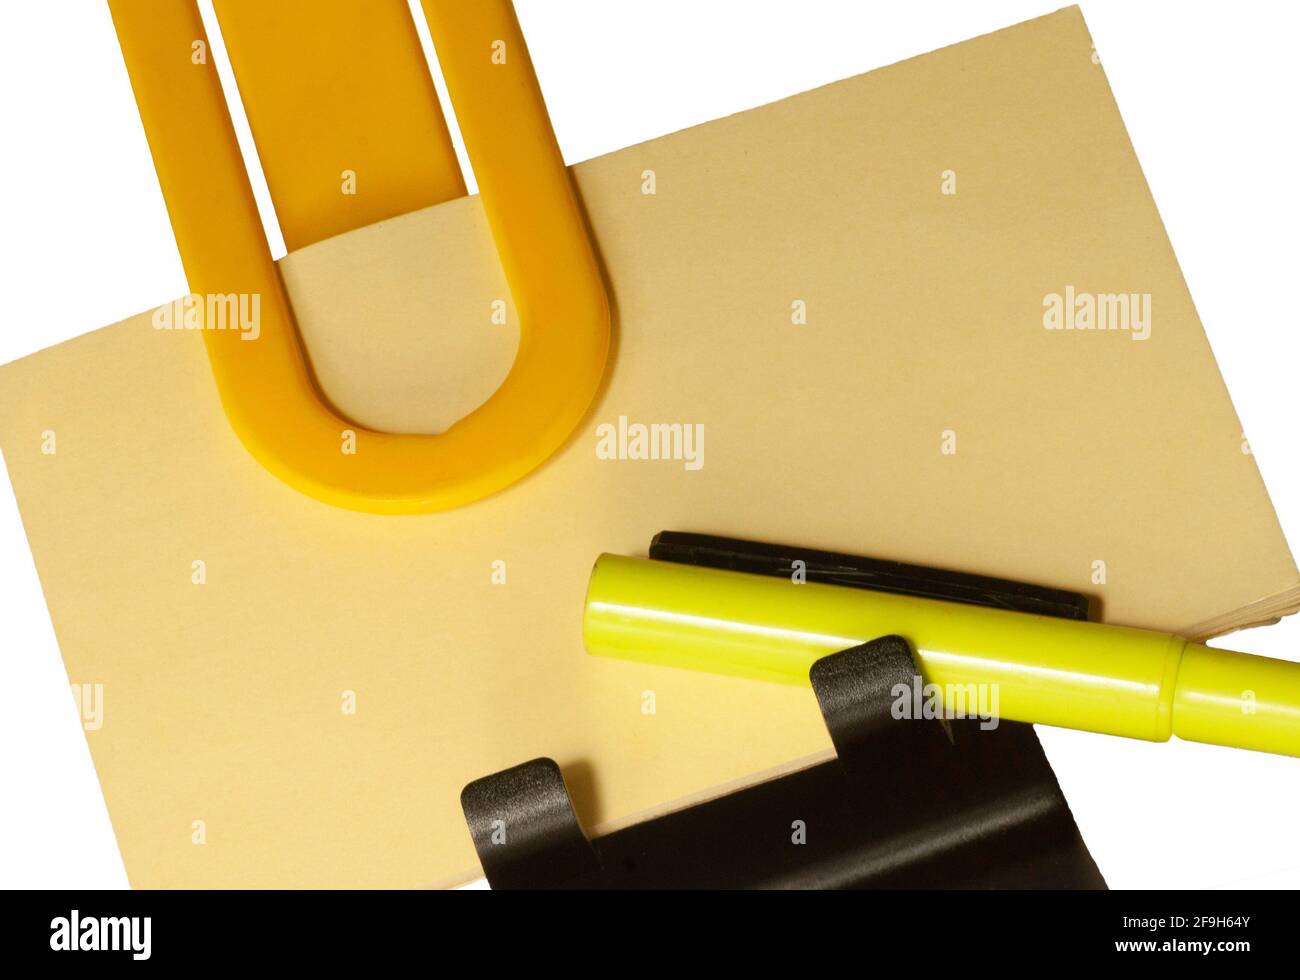 A memo so you don't forget. It is giant and bright yellow. Write it down with a  marker and clip the paper with an oversize paper clip. Stock Photo